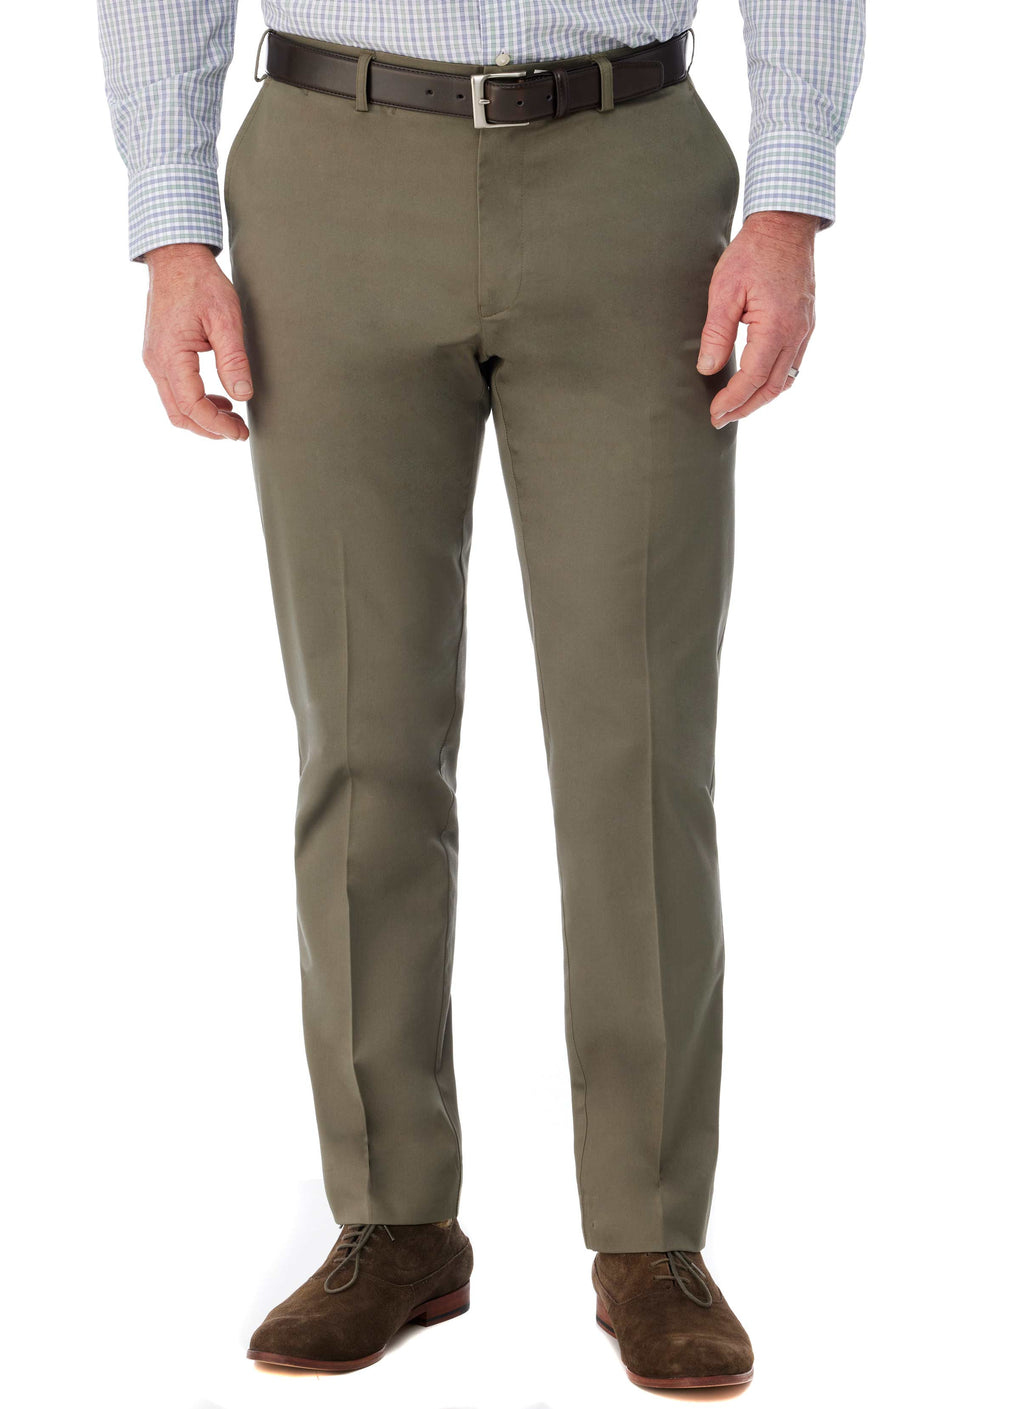 LOXTON CONTEMPORARY FIT CASUAL TROUSER - OLIVE